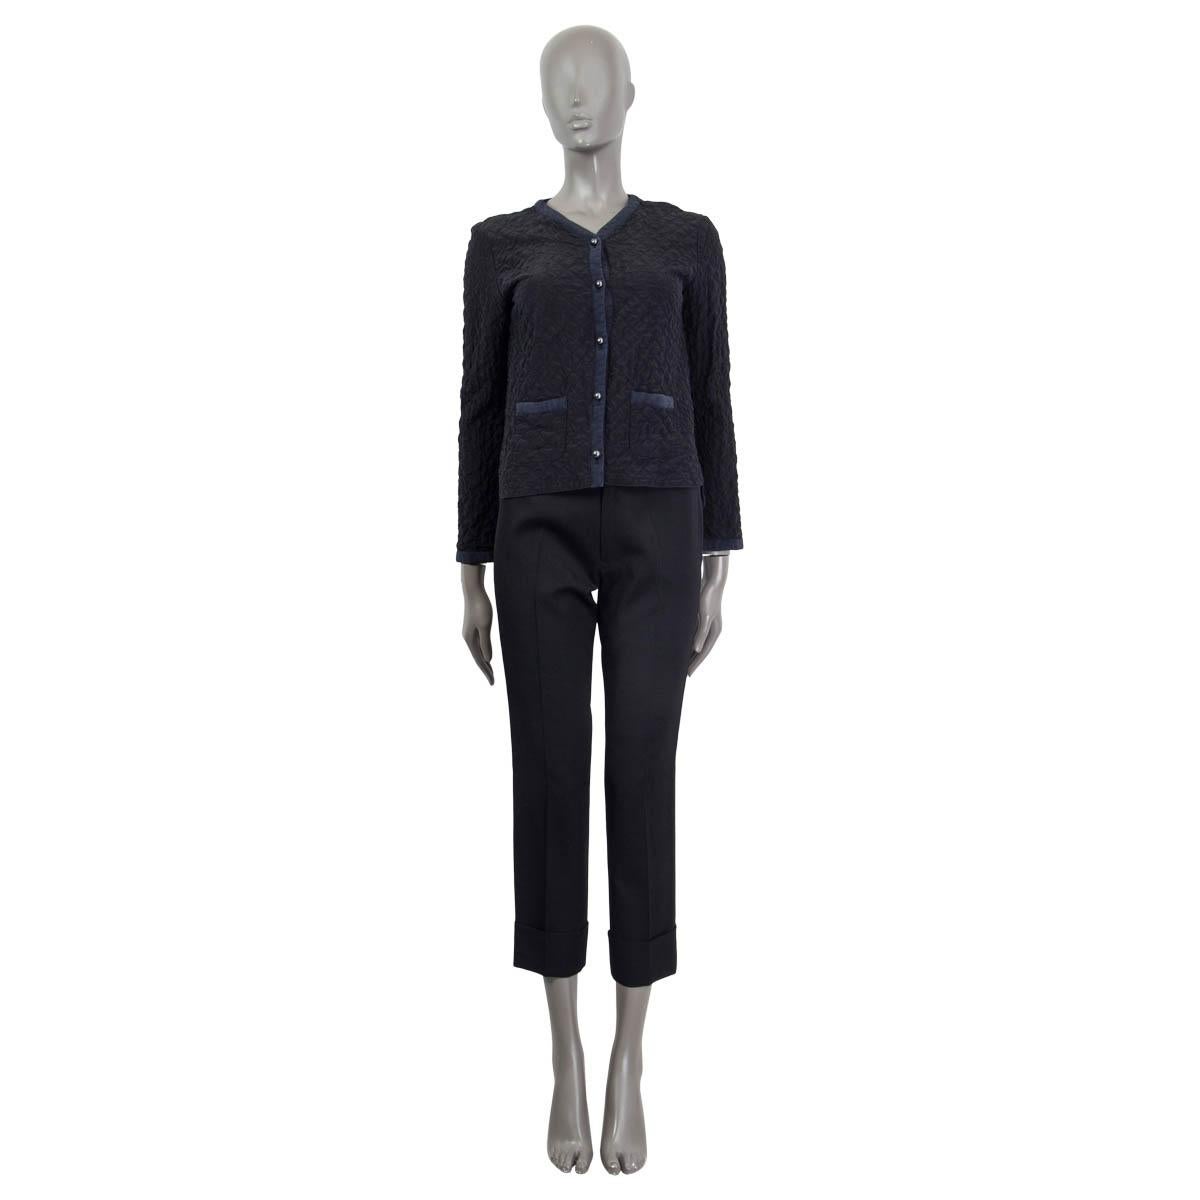 100% authentic Chanel 2015 quilted crepe de chine jacket in black and midnight blue silk (100%). Features two patch pockets on the front. Opens with five 'CC' buttons on the front. Unlined. Colors washed out, otherwise in excellent